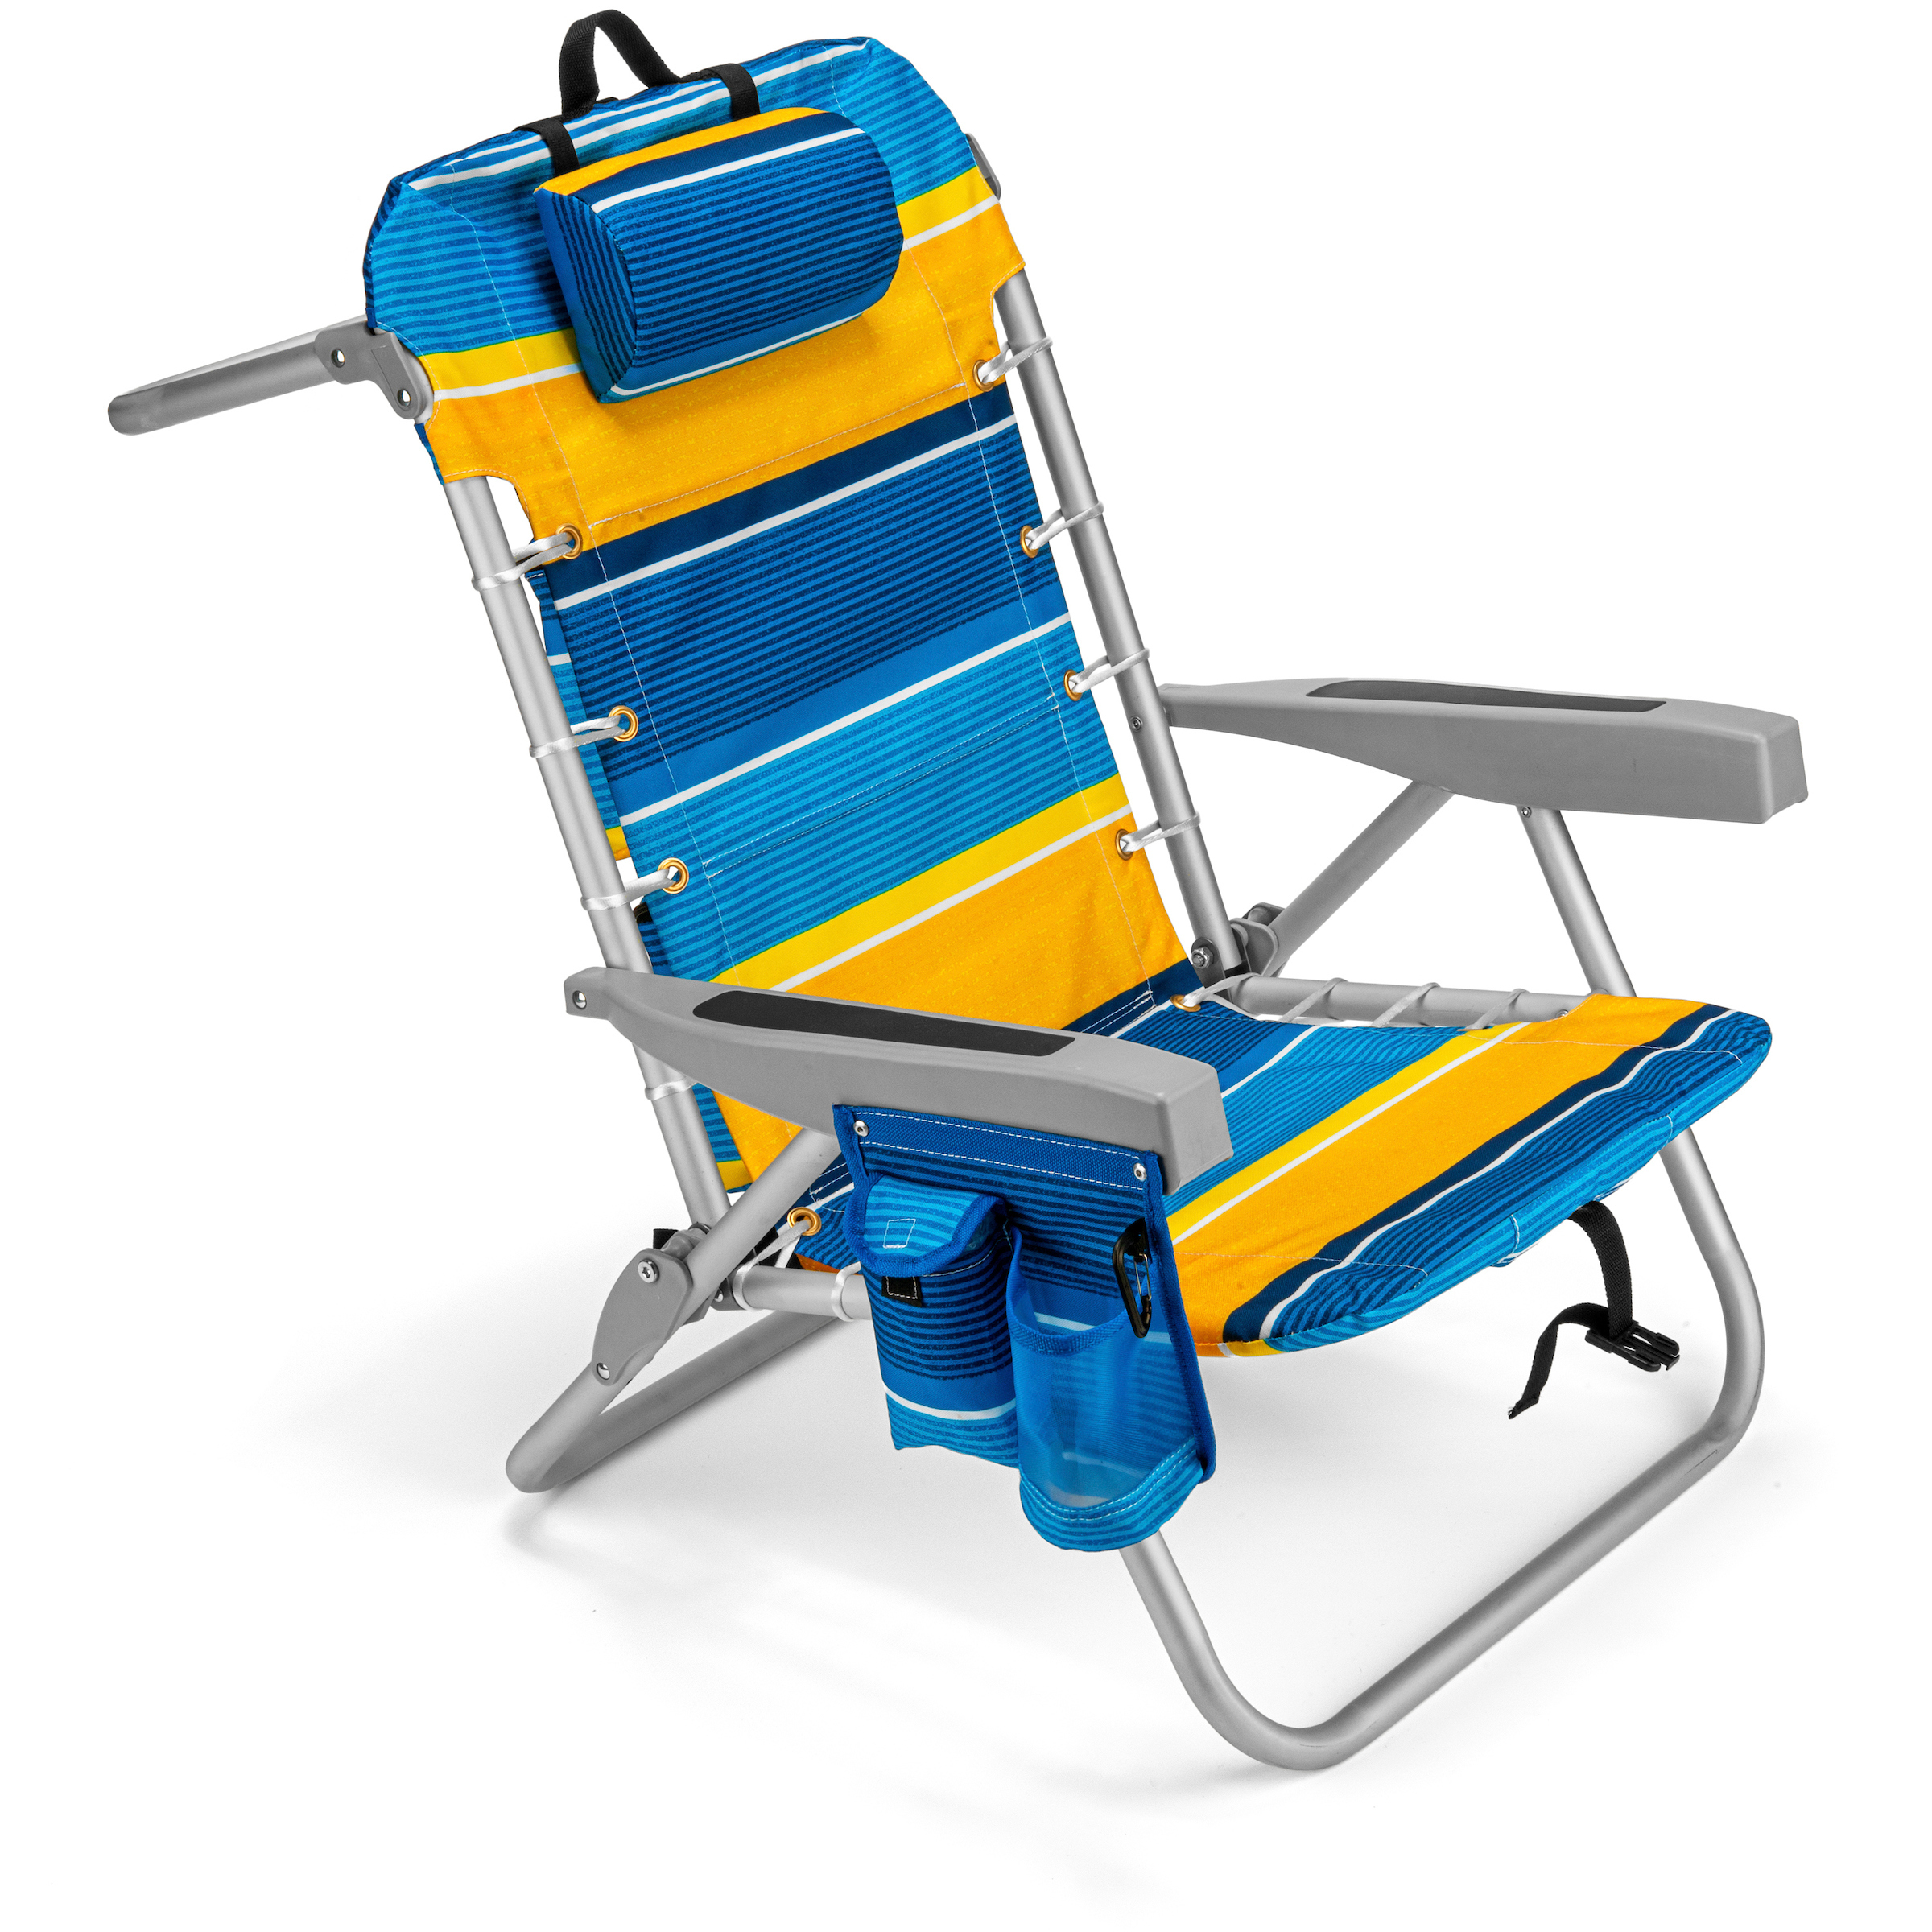 Homevative Folding Backpack Beach Chair with 5 Positions, Towel bar, Blue Yellow - image 1 of 4